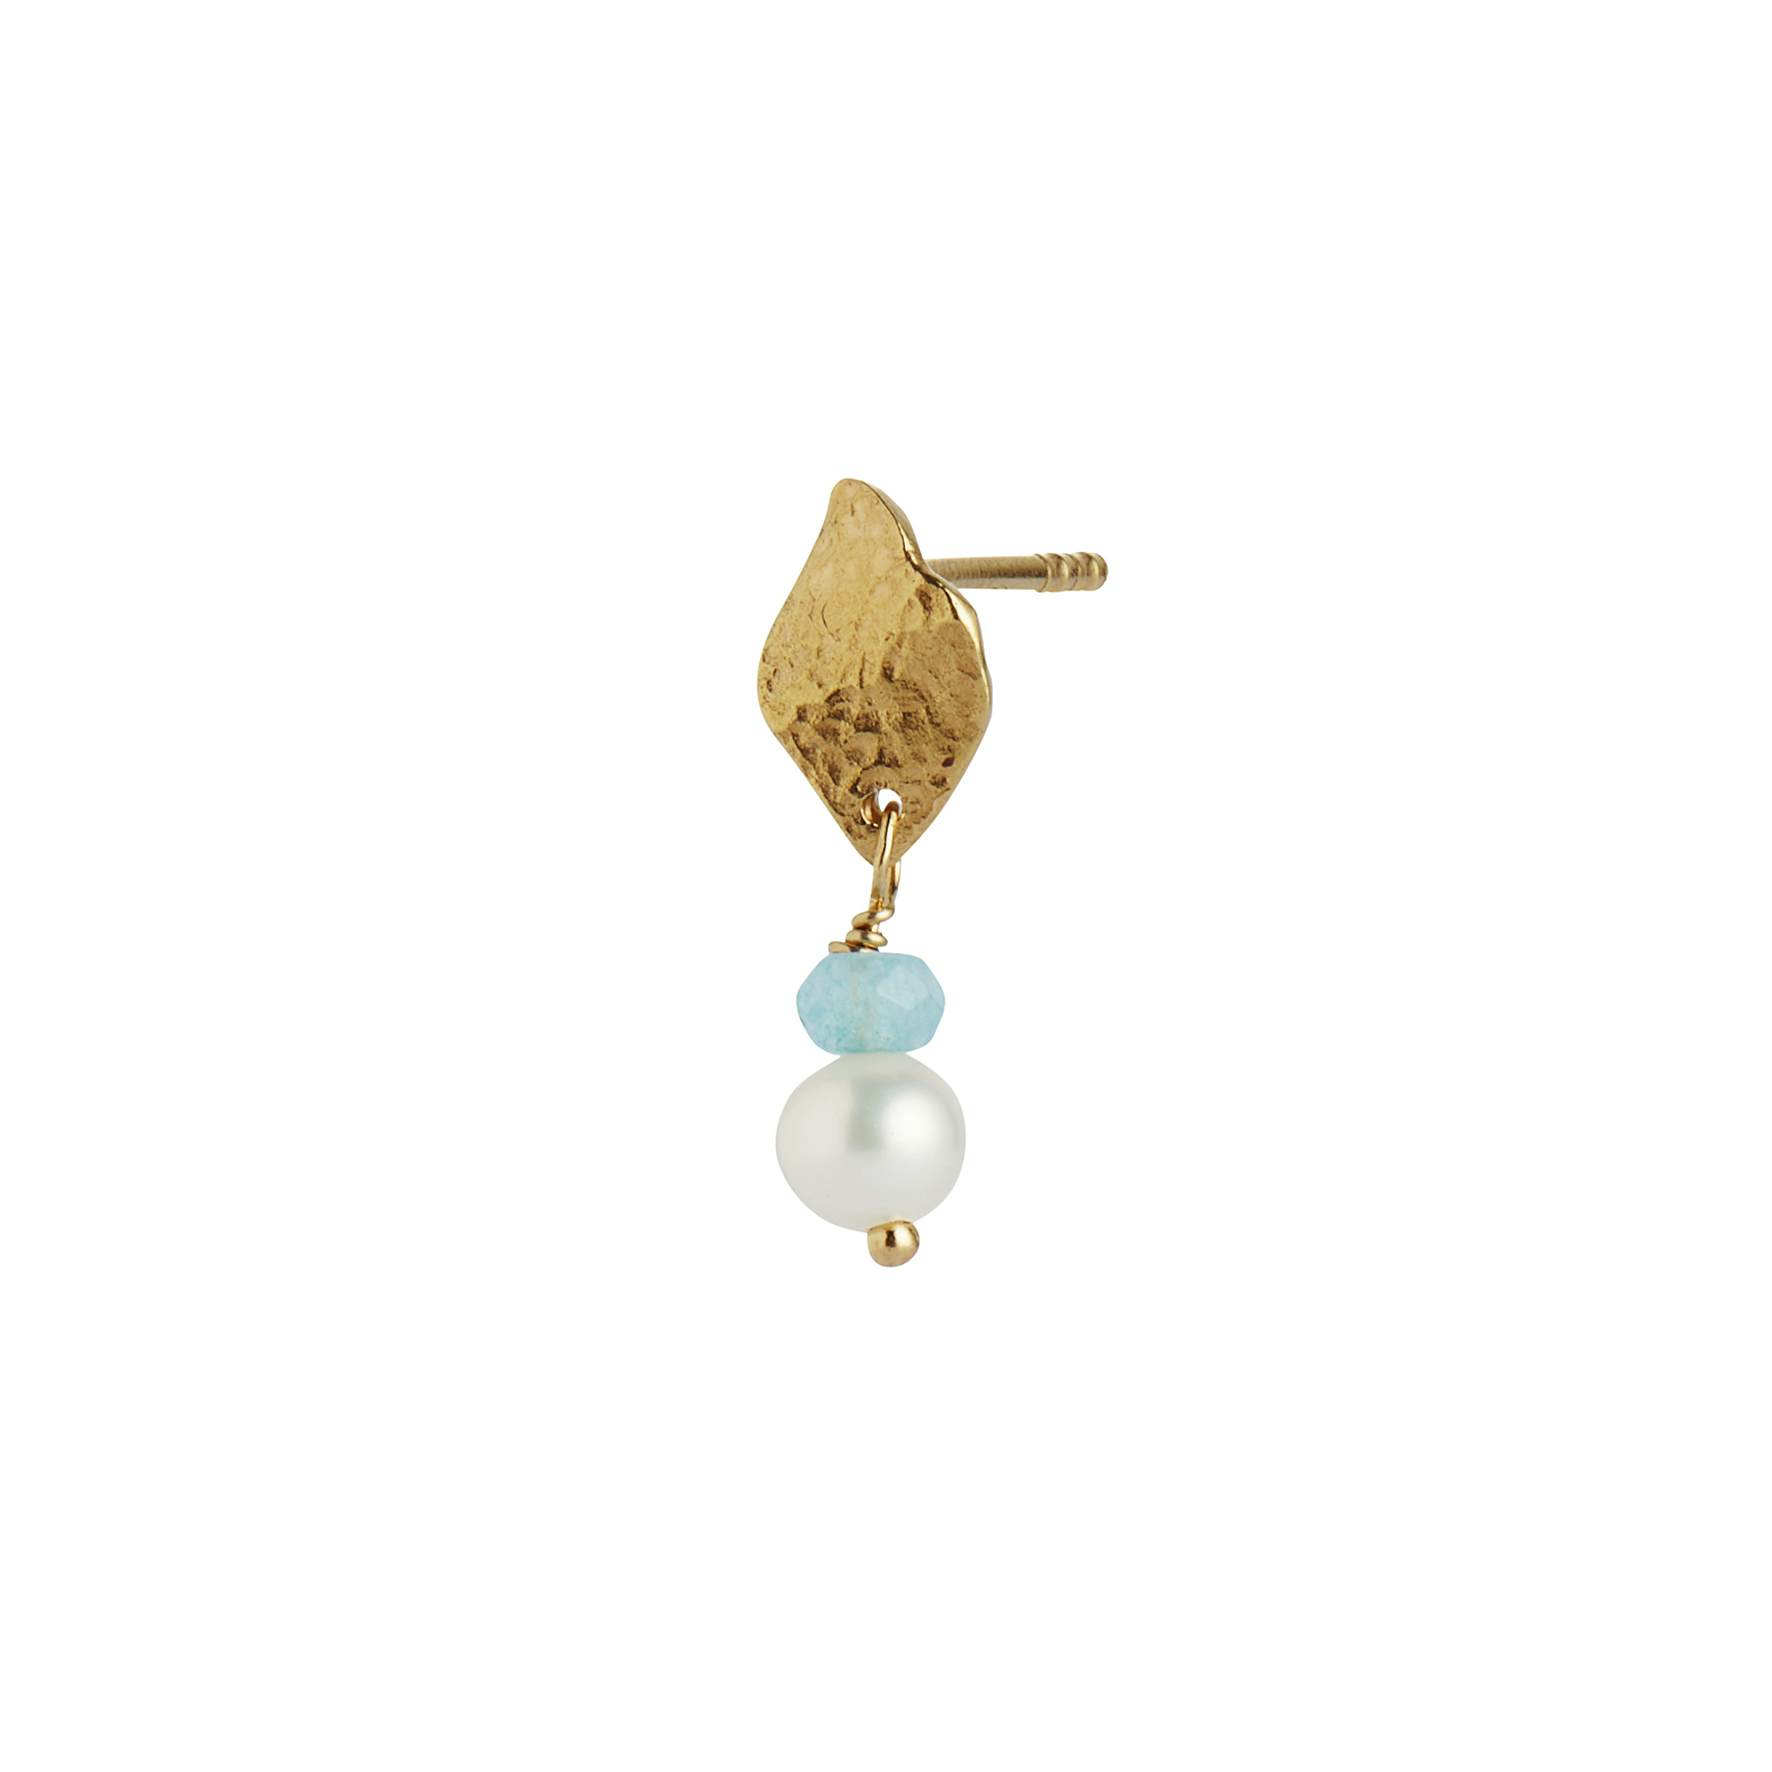 Ile De L'Amour with Pearl and Light Blue Topaz Earring fra STINE A Jewelry i Forgyldt-Sølv Sterling 925